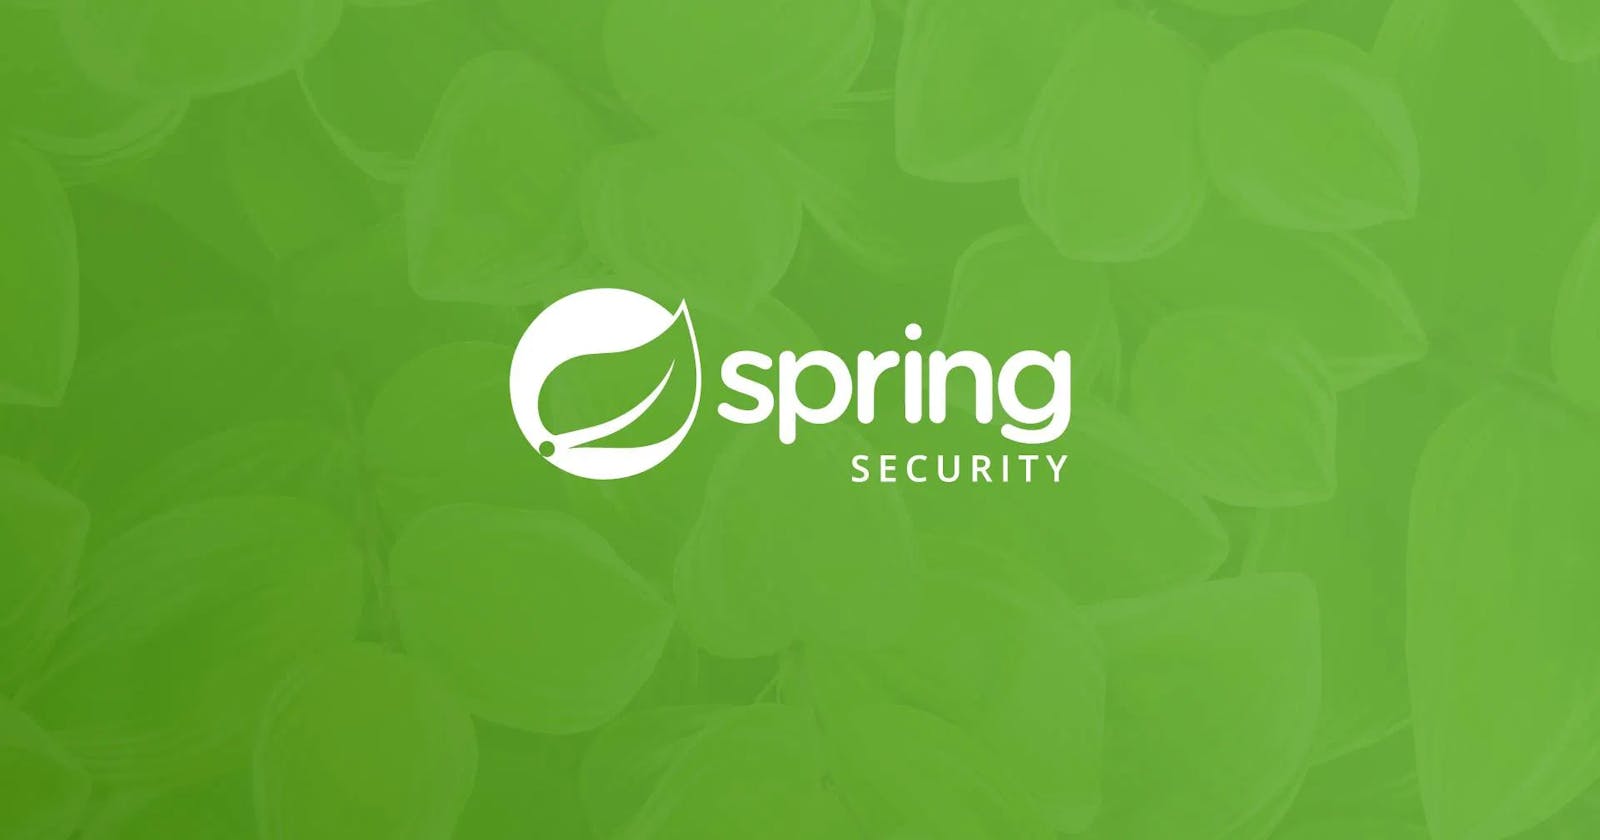 SPRING BOOT SECURITY WITH OAUTH 2.0